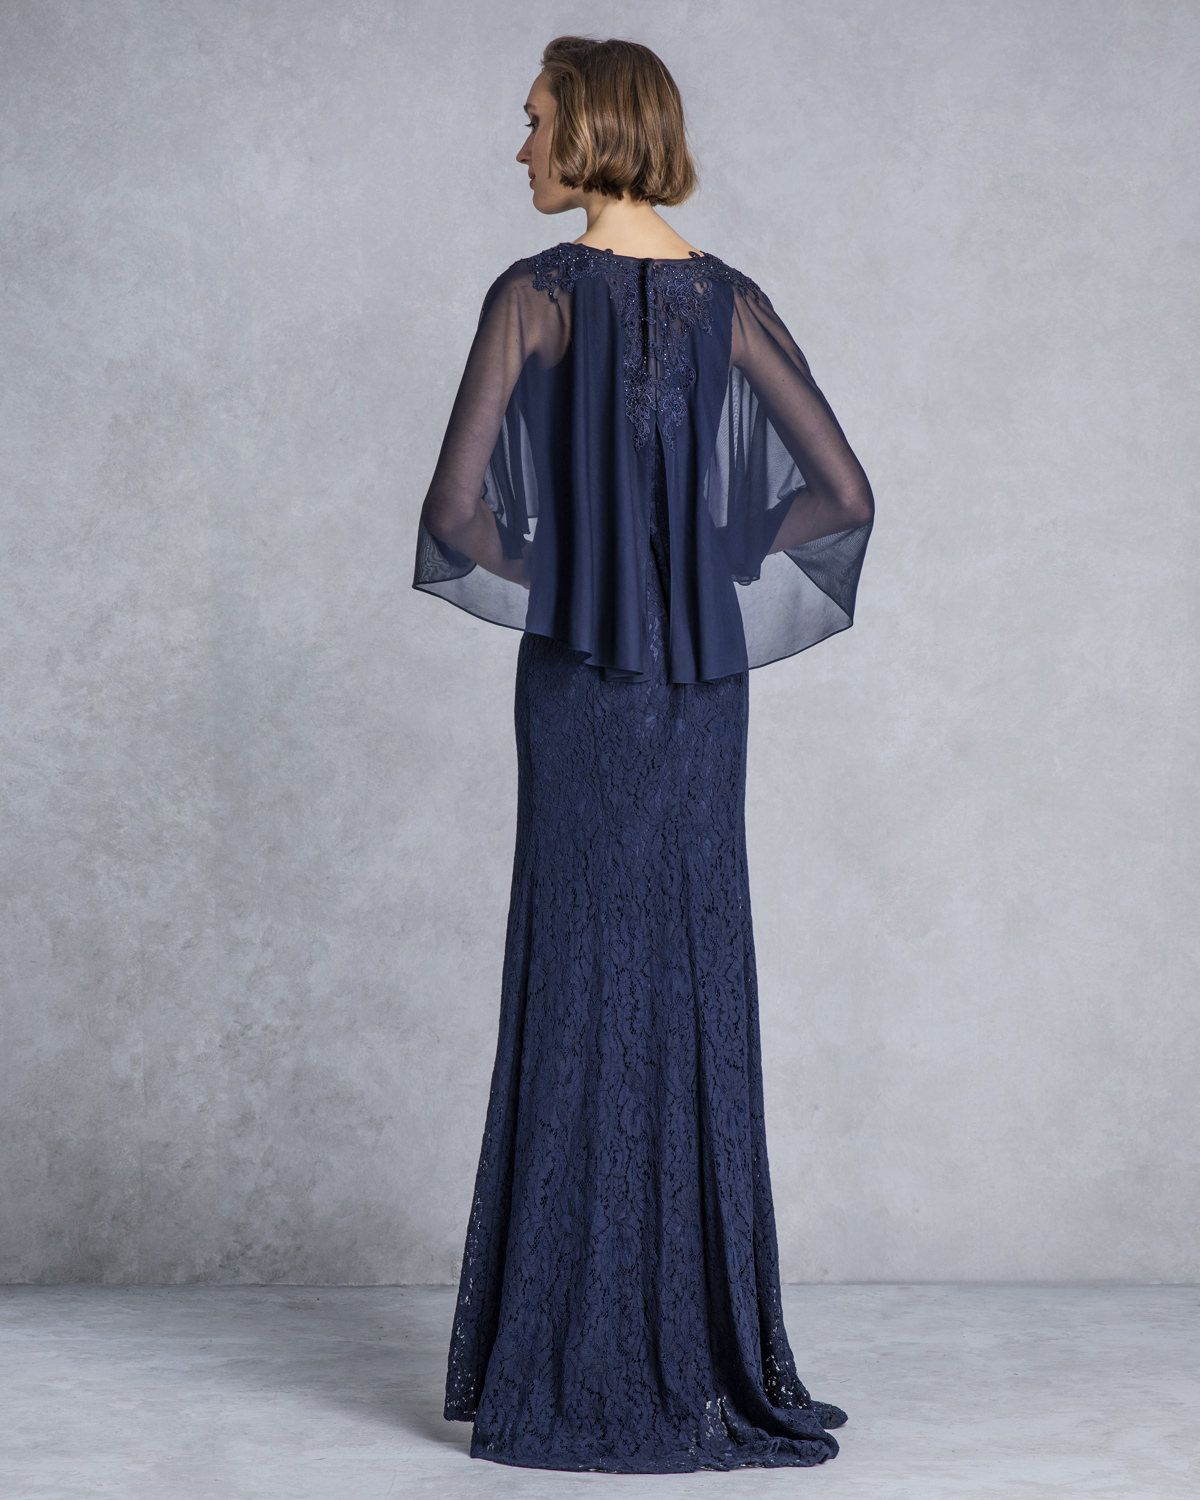 Classic Dresses / Long evening dress with lace skirt and cape